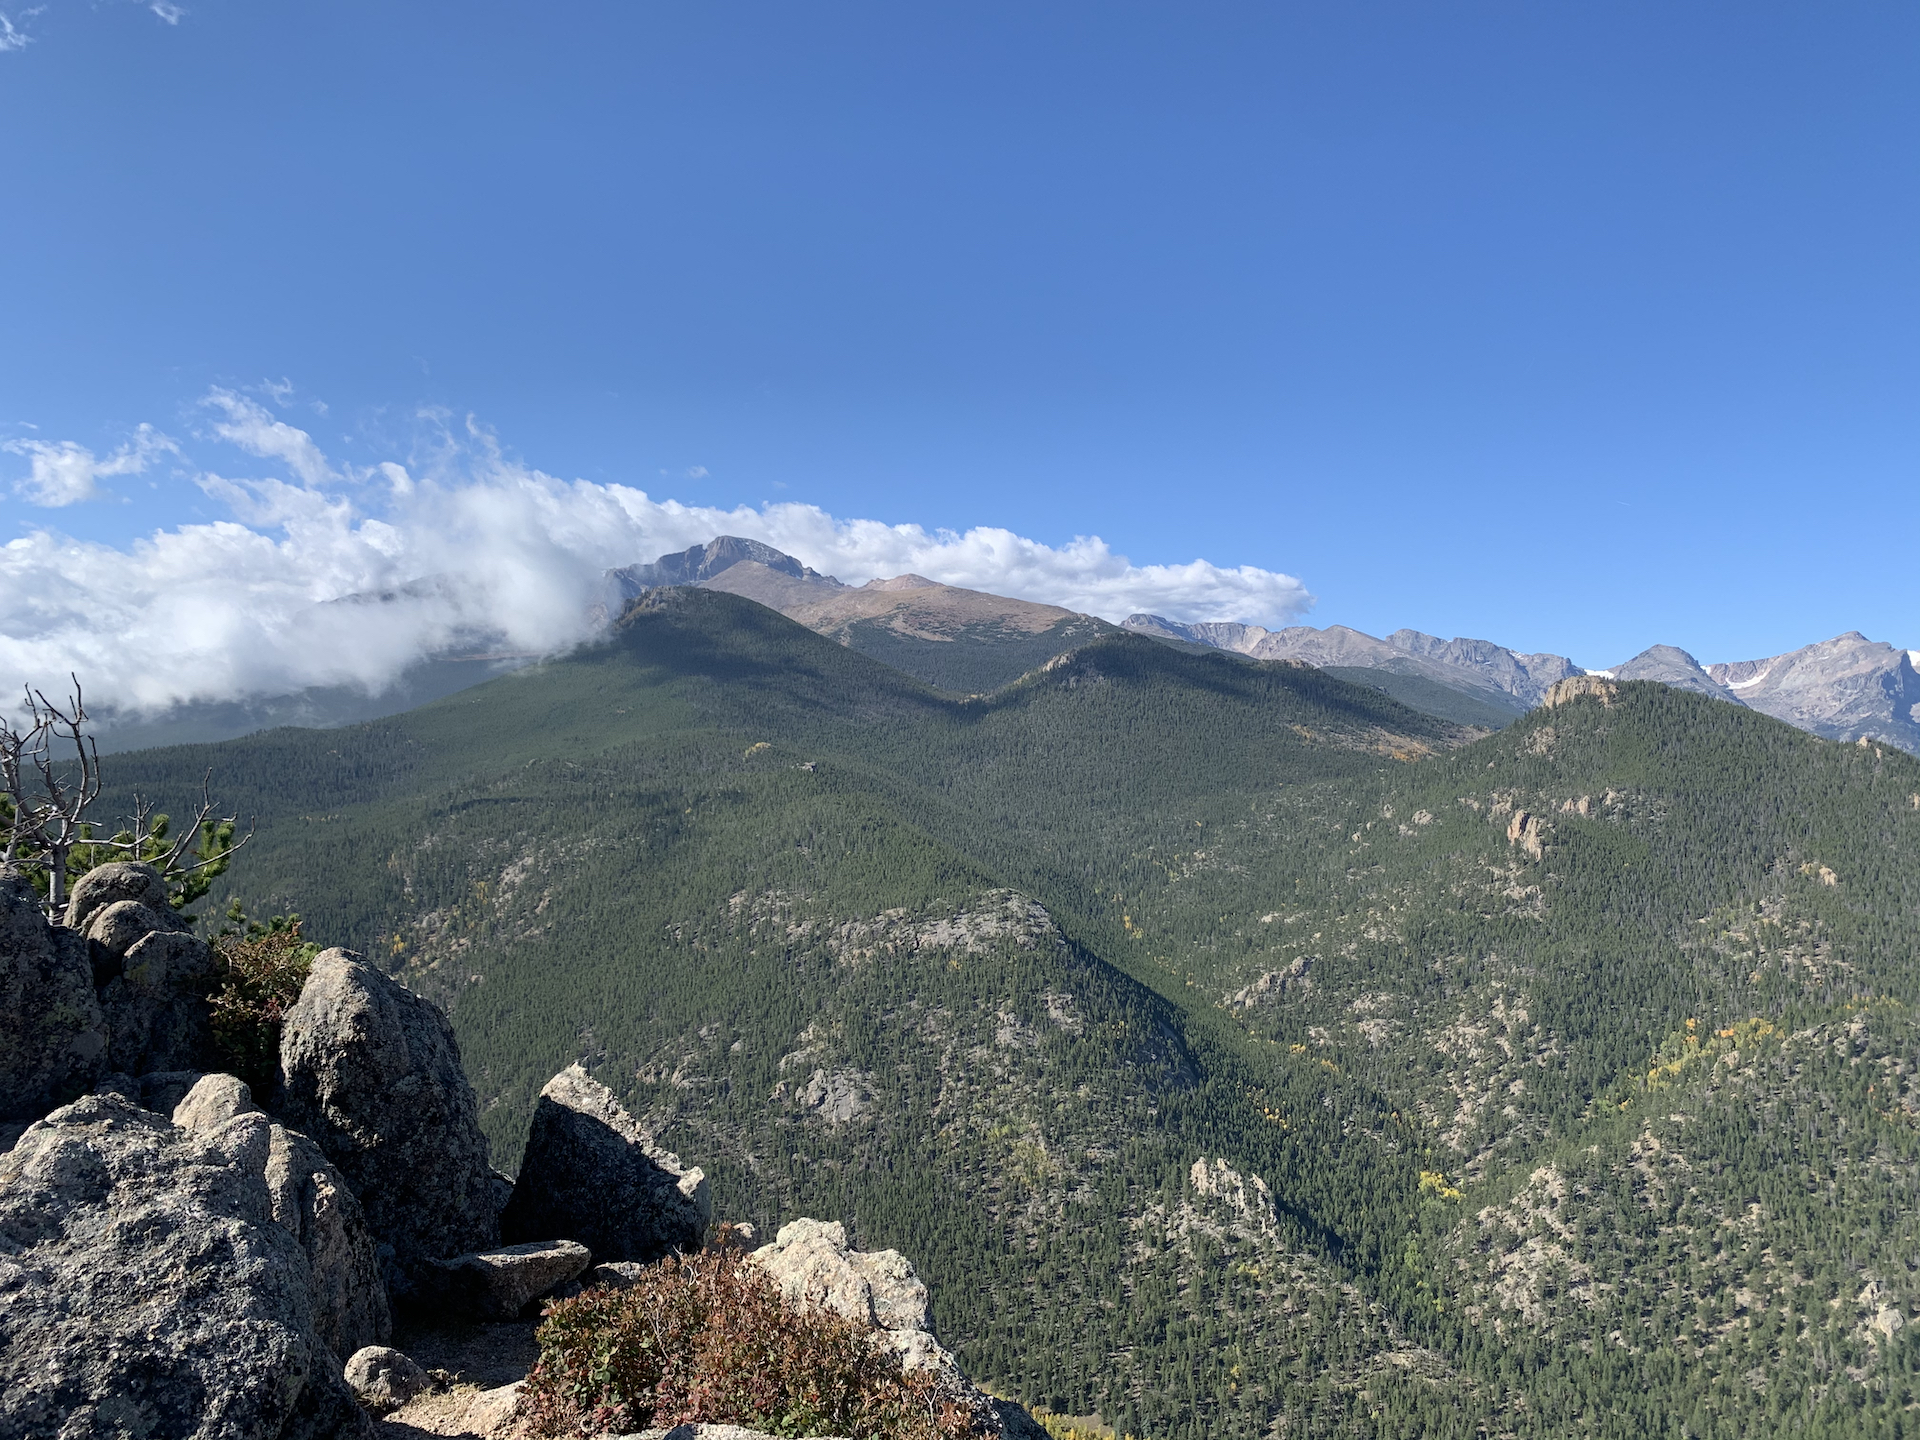 Longs Peak from Lily Mountain, Estes Park, CO